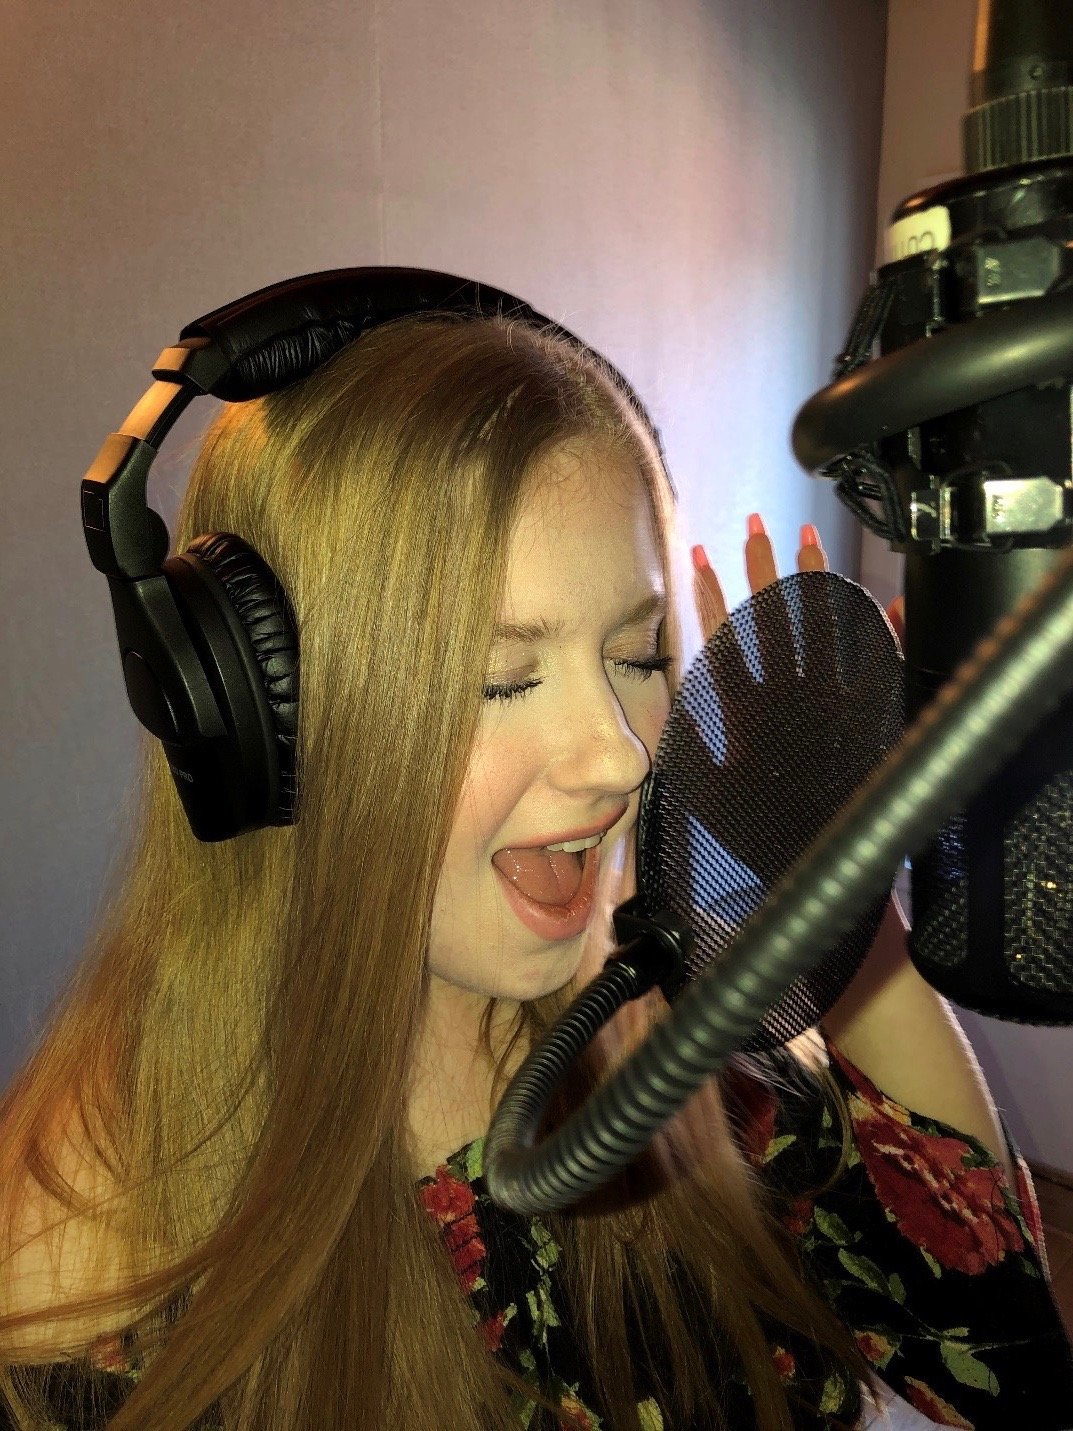 Jessica Kaela, shown in studio singing her newly released single, “Crying.”